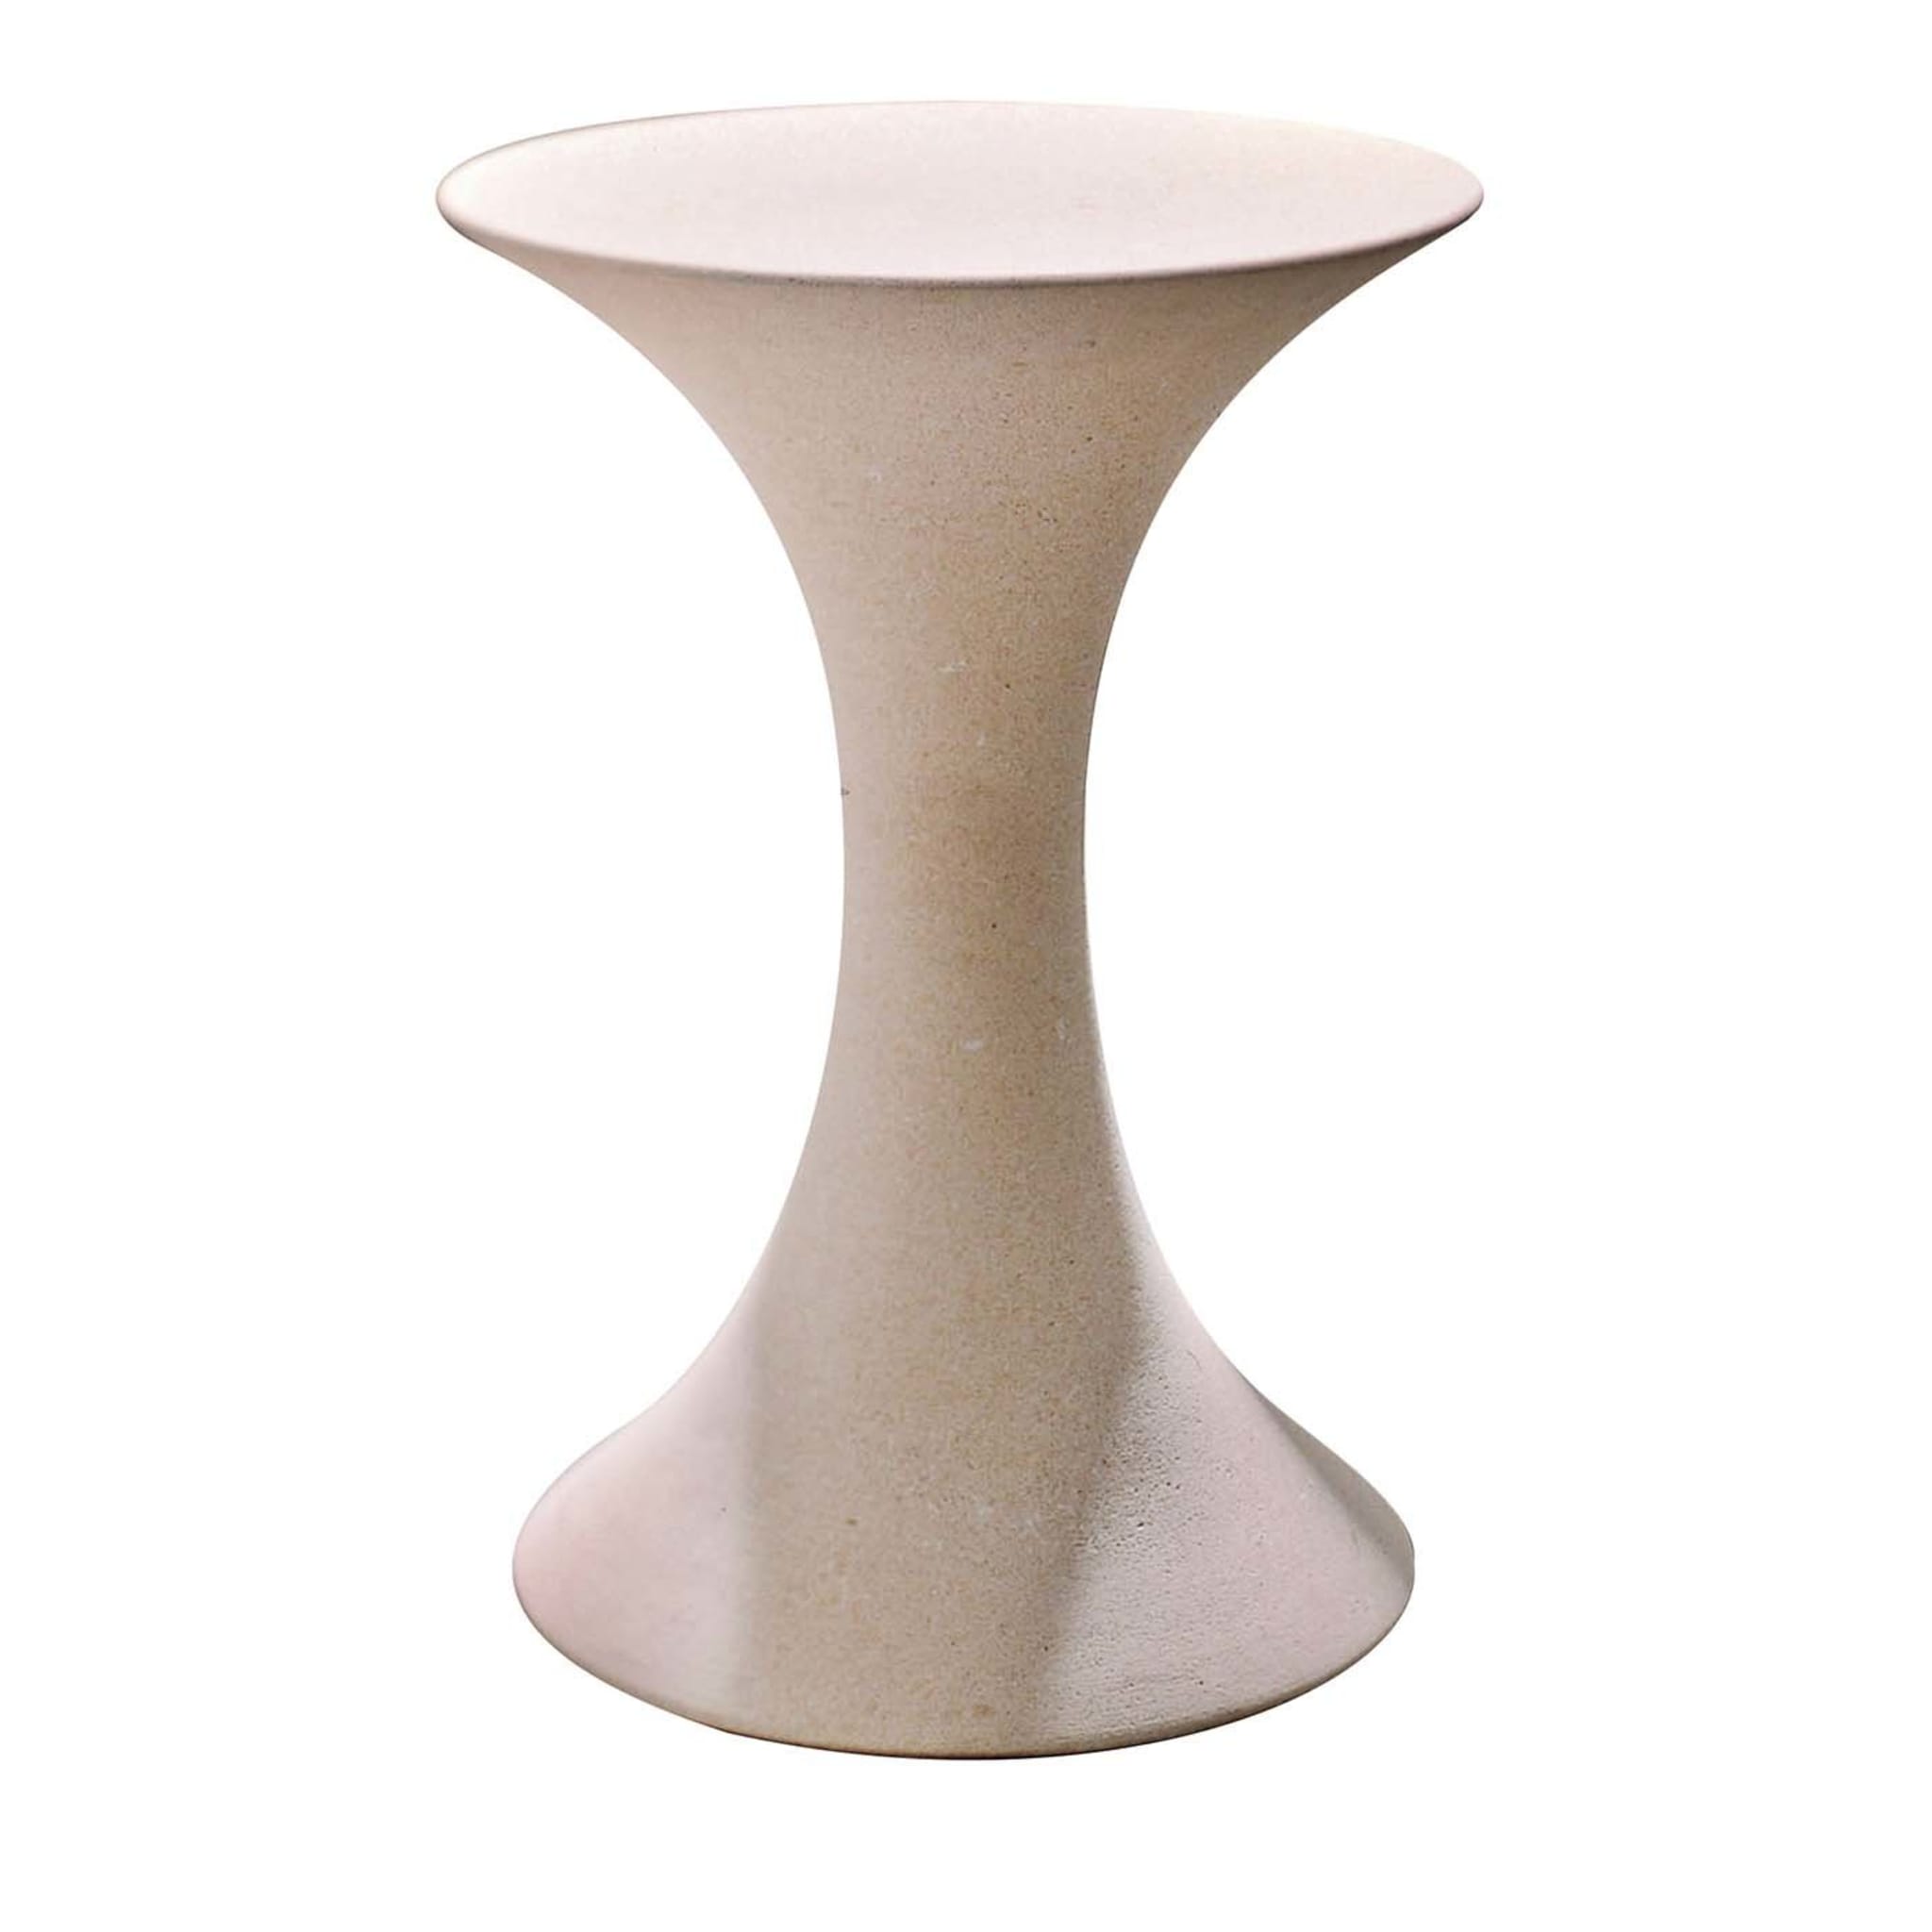 Tizia Side Table by LDM Design - Main view